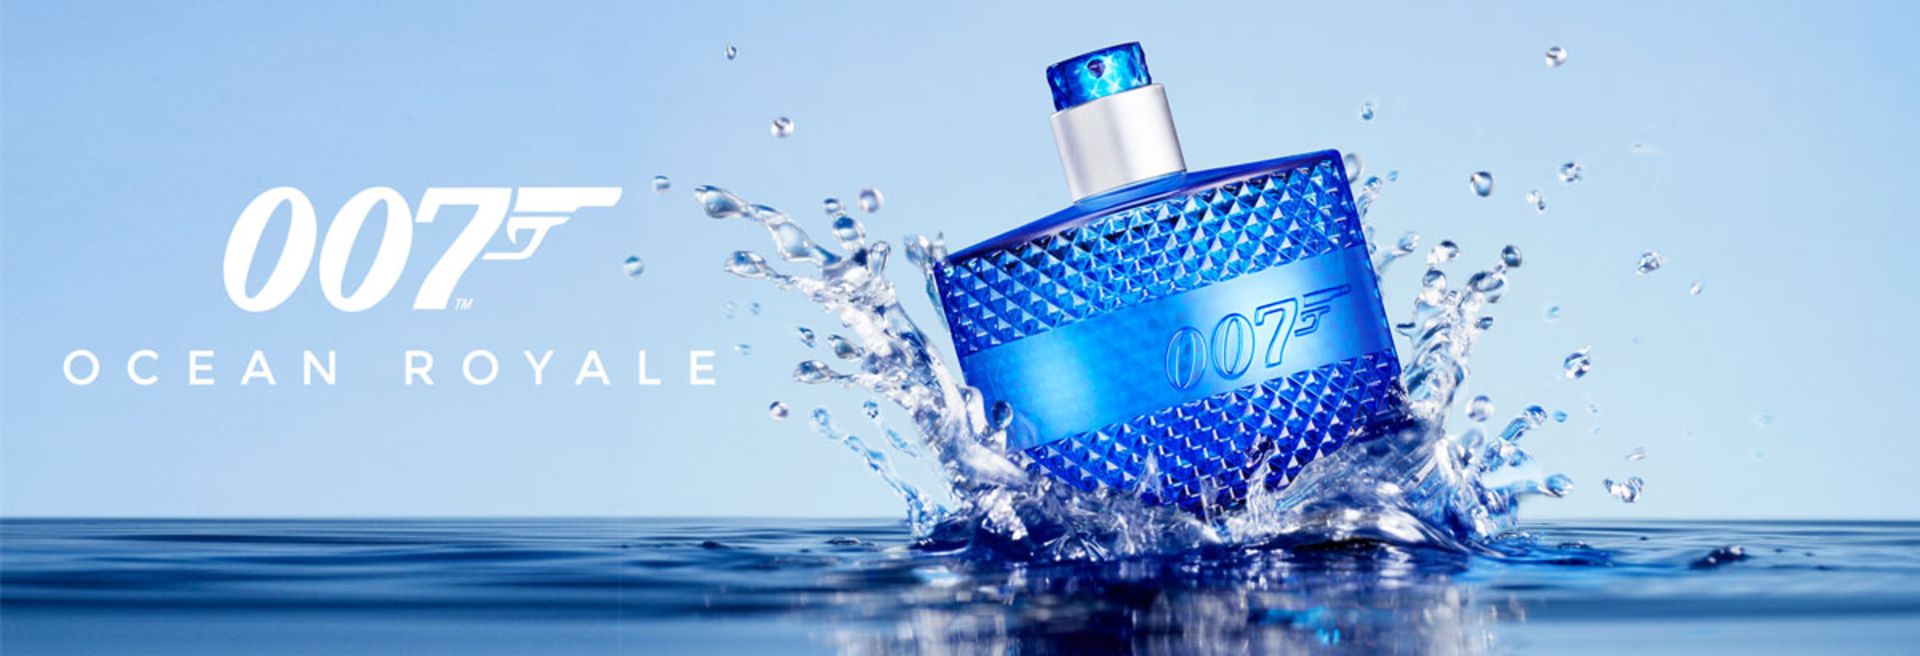 V Brand New James Bond 007 Ocean Royale EDT RRP29.00 X 2 YOUR BID PRICE TO BE MULTIPLIED BY TWO